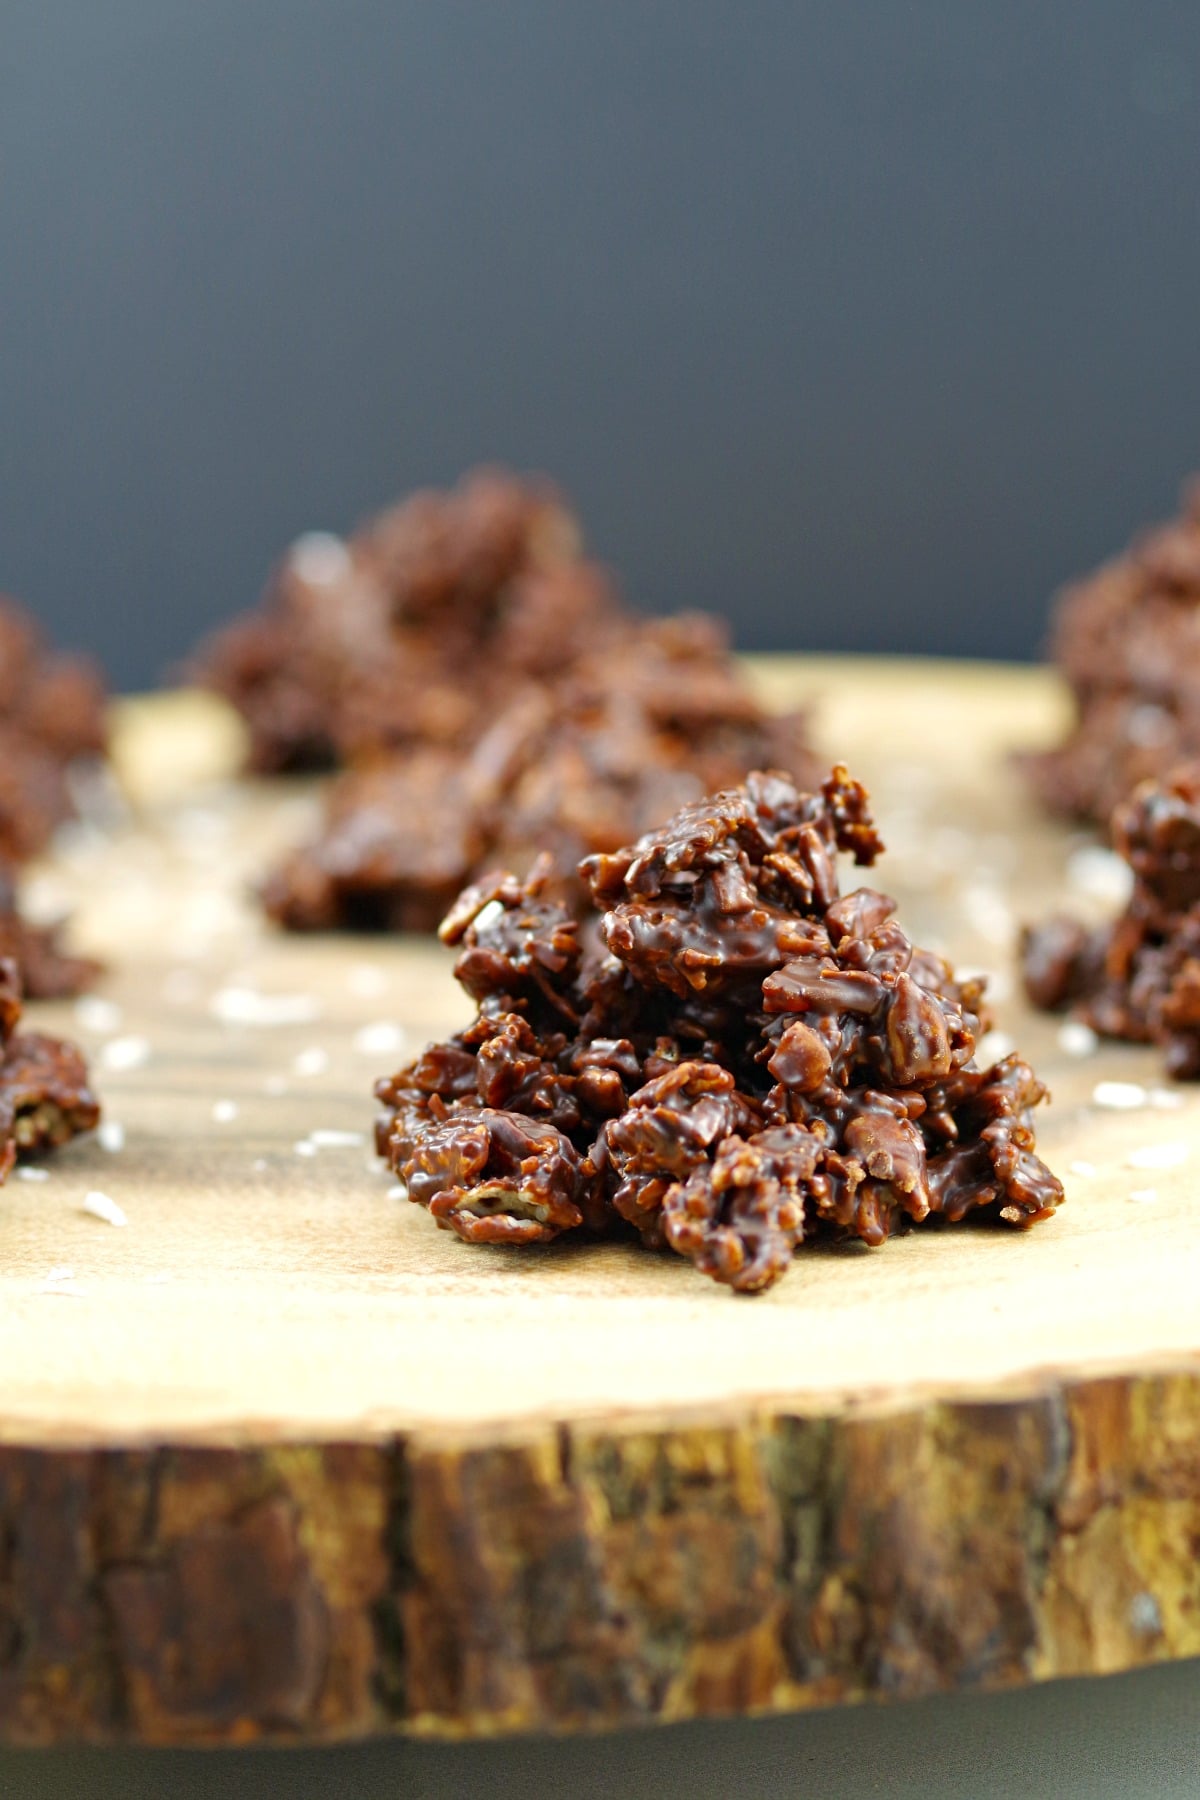 Healthy Chocolate Cluster on a wooden display with more chocolate cluster in background